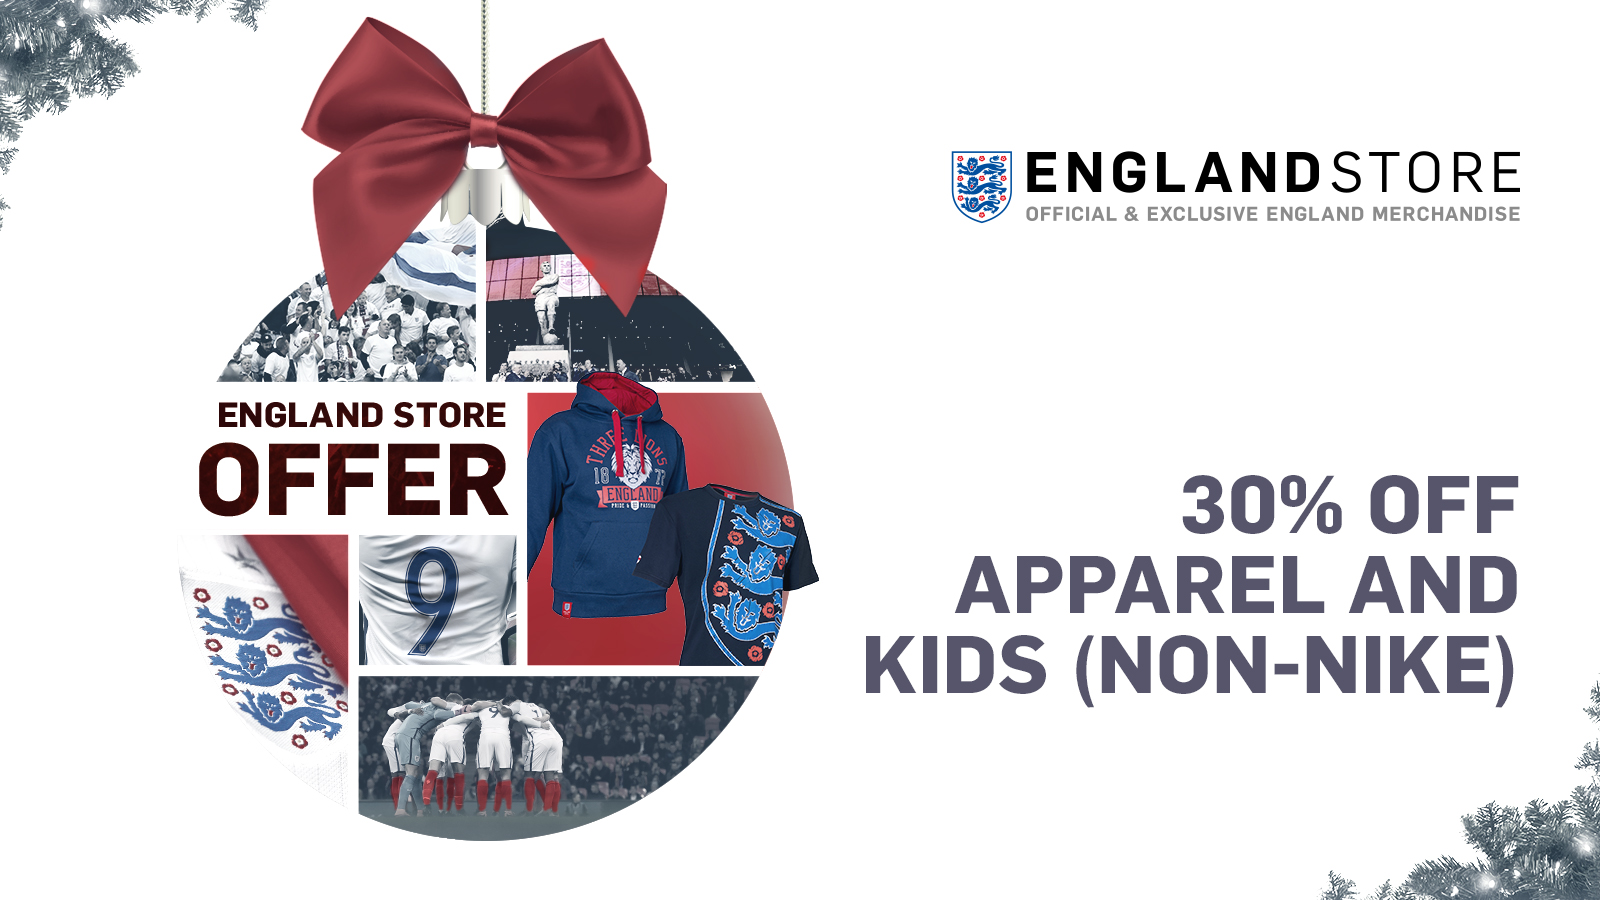 Today's Christmas cracker: 30% off apparel at the England Store